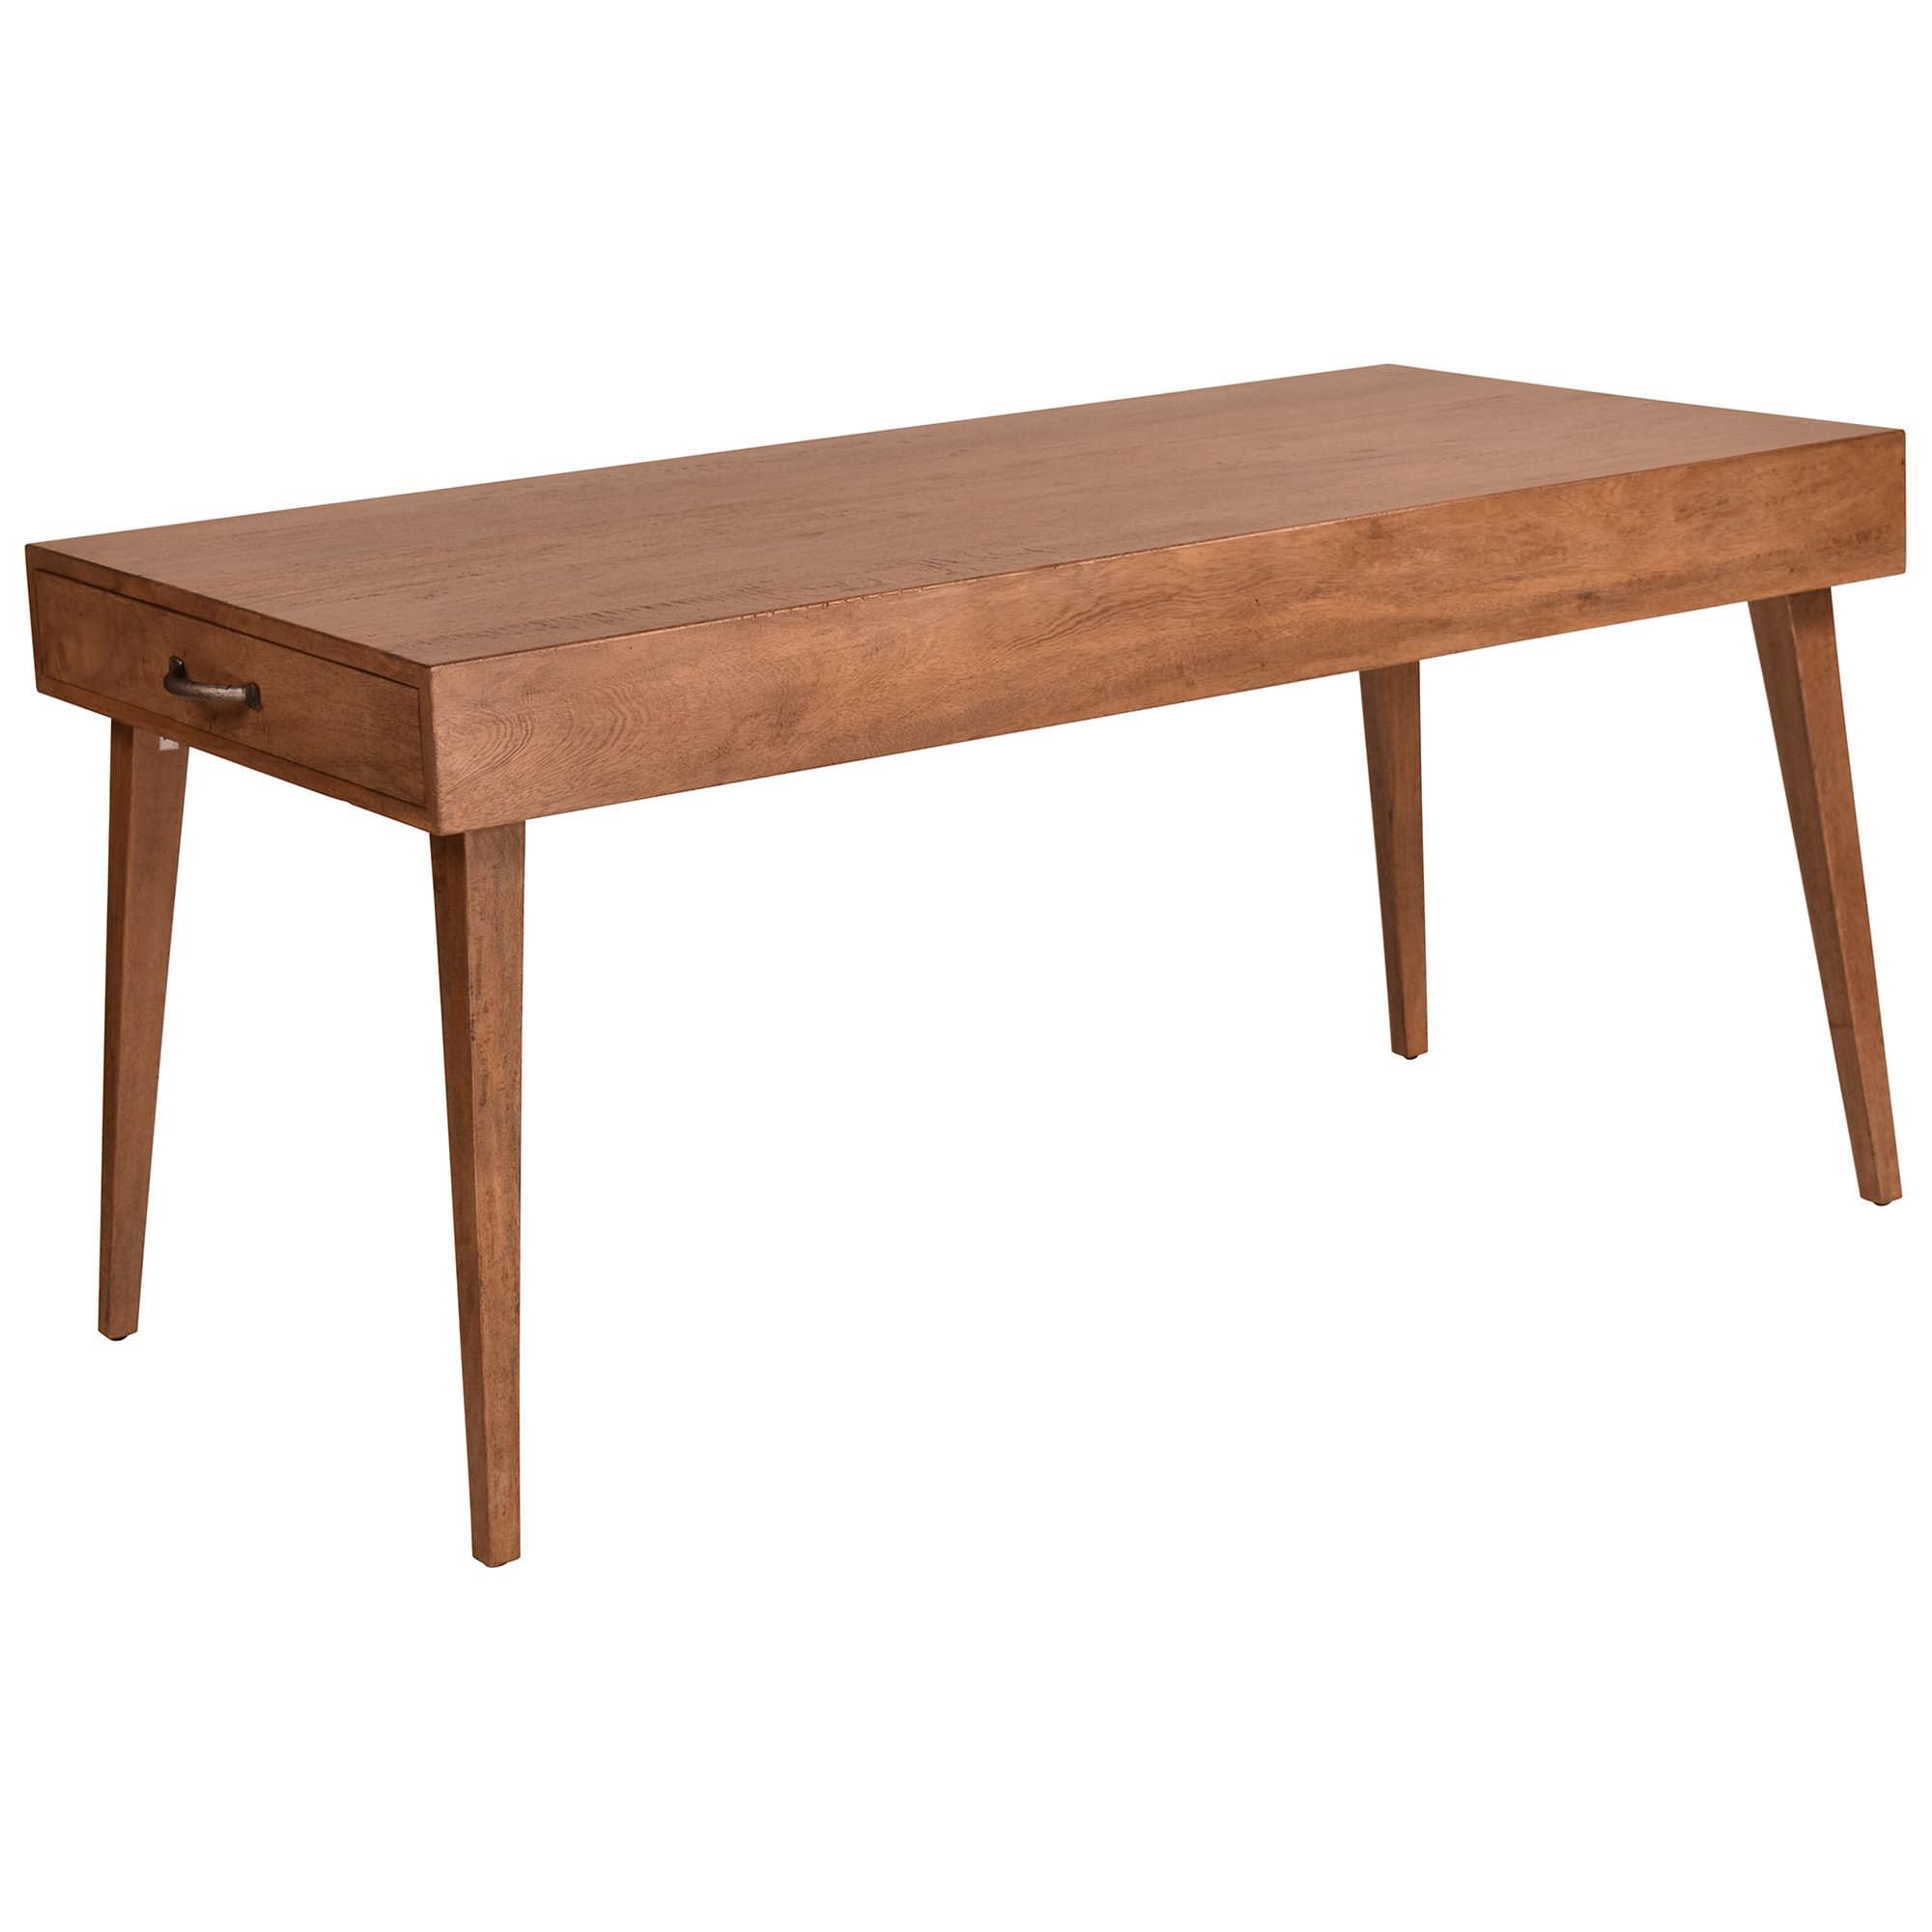 Midville Timber Dining Table with End Drawers, 160cm